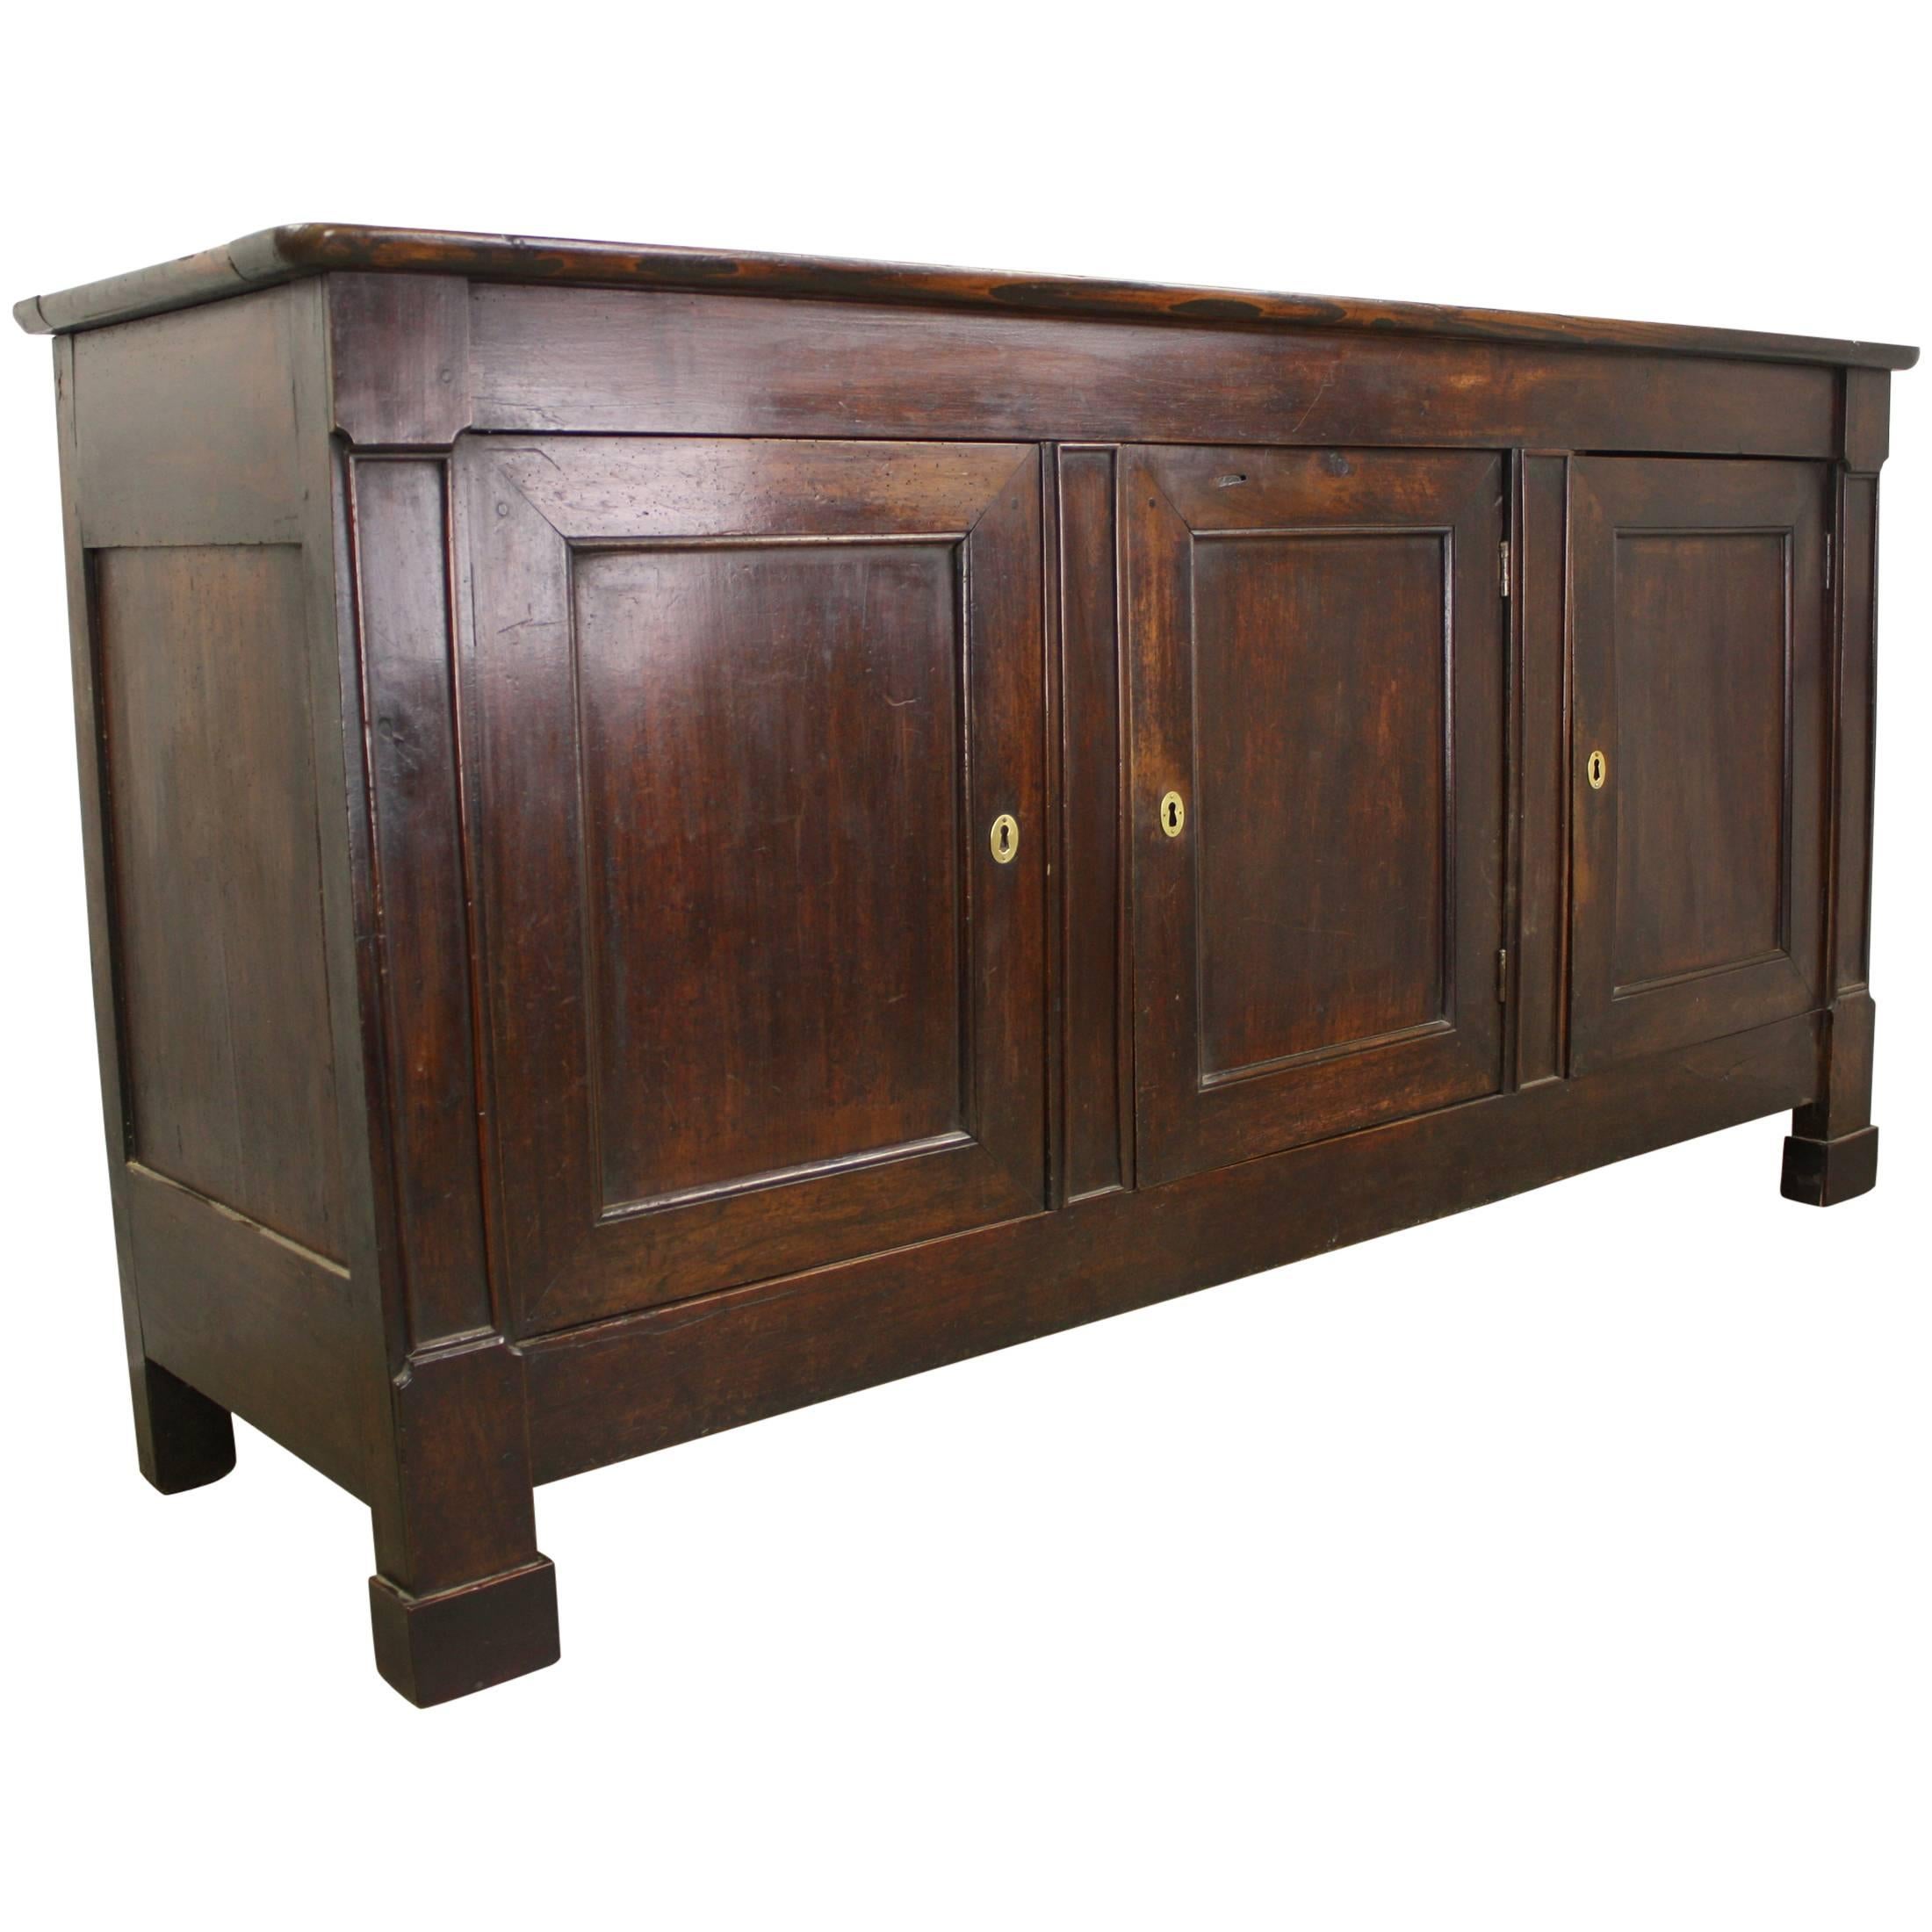 Antique French Directoire Enfilade in Walnut with Chestnut Top